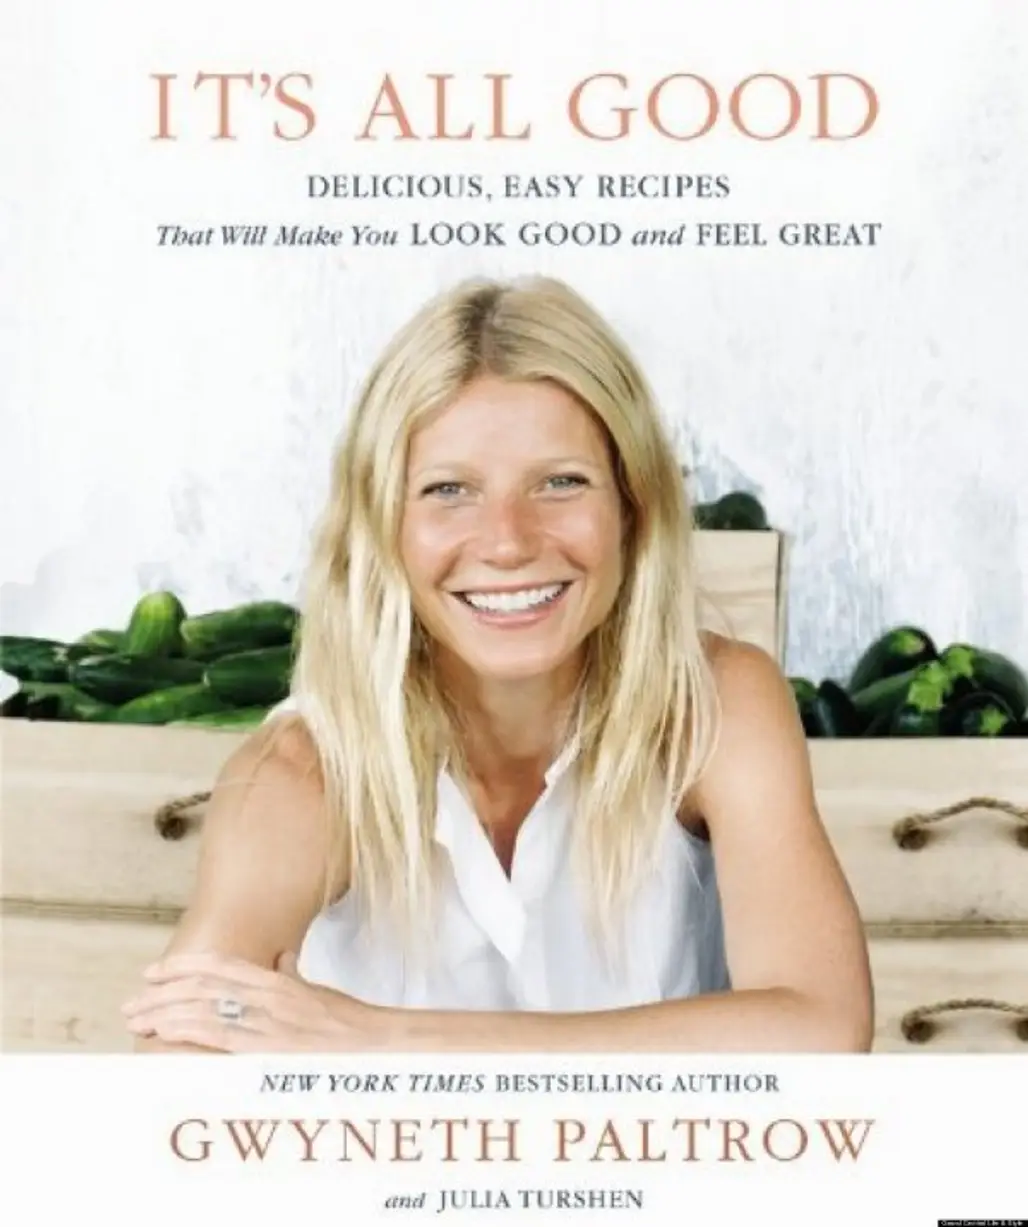 ‘It's All Good: Delicious, Easy Recipes That Will Make You Look Good and Feel Great’ by Gwyneth Paltrow